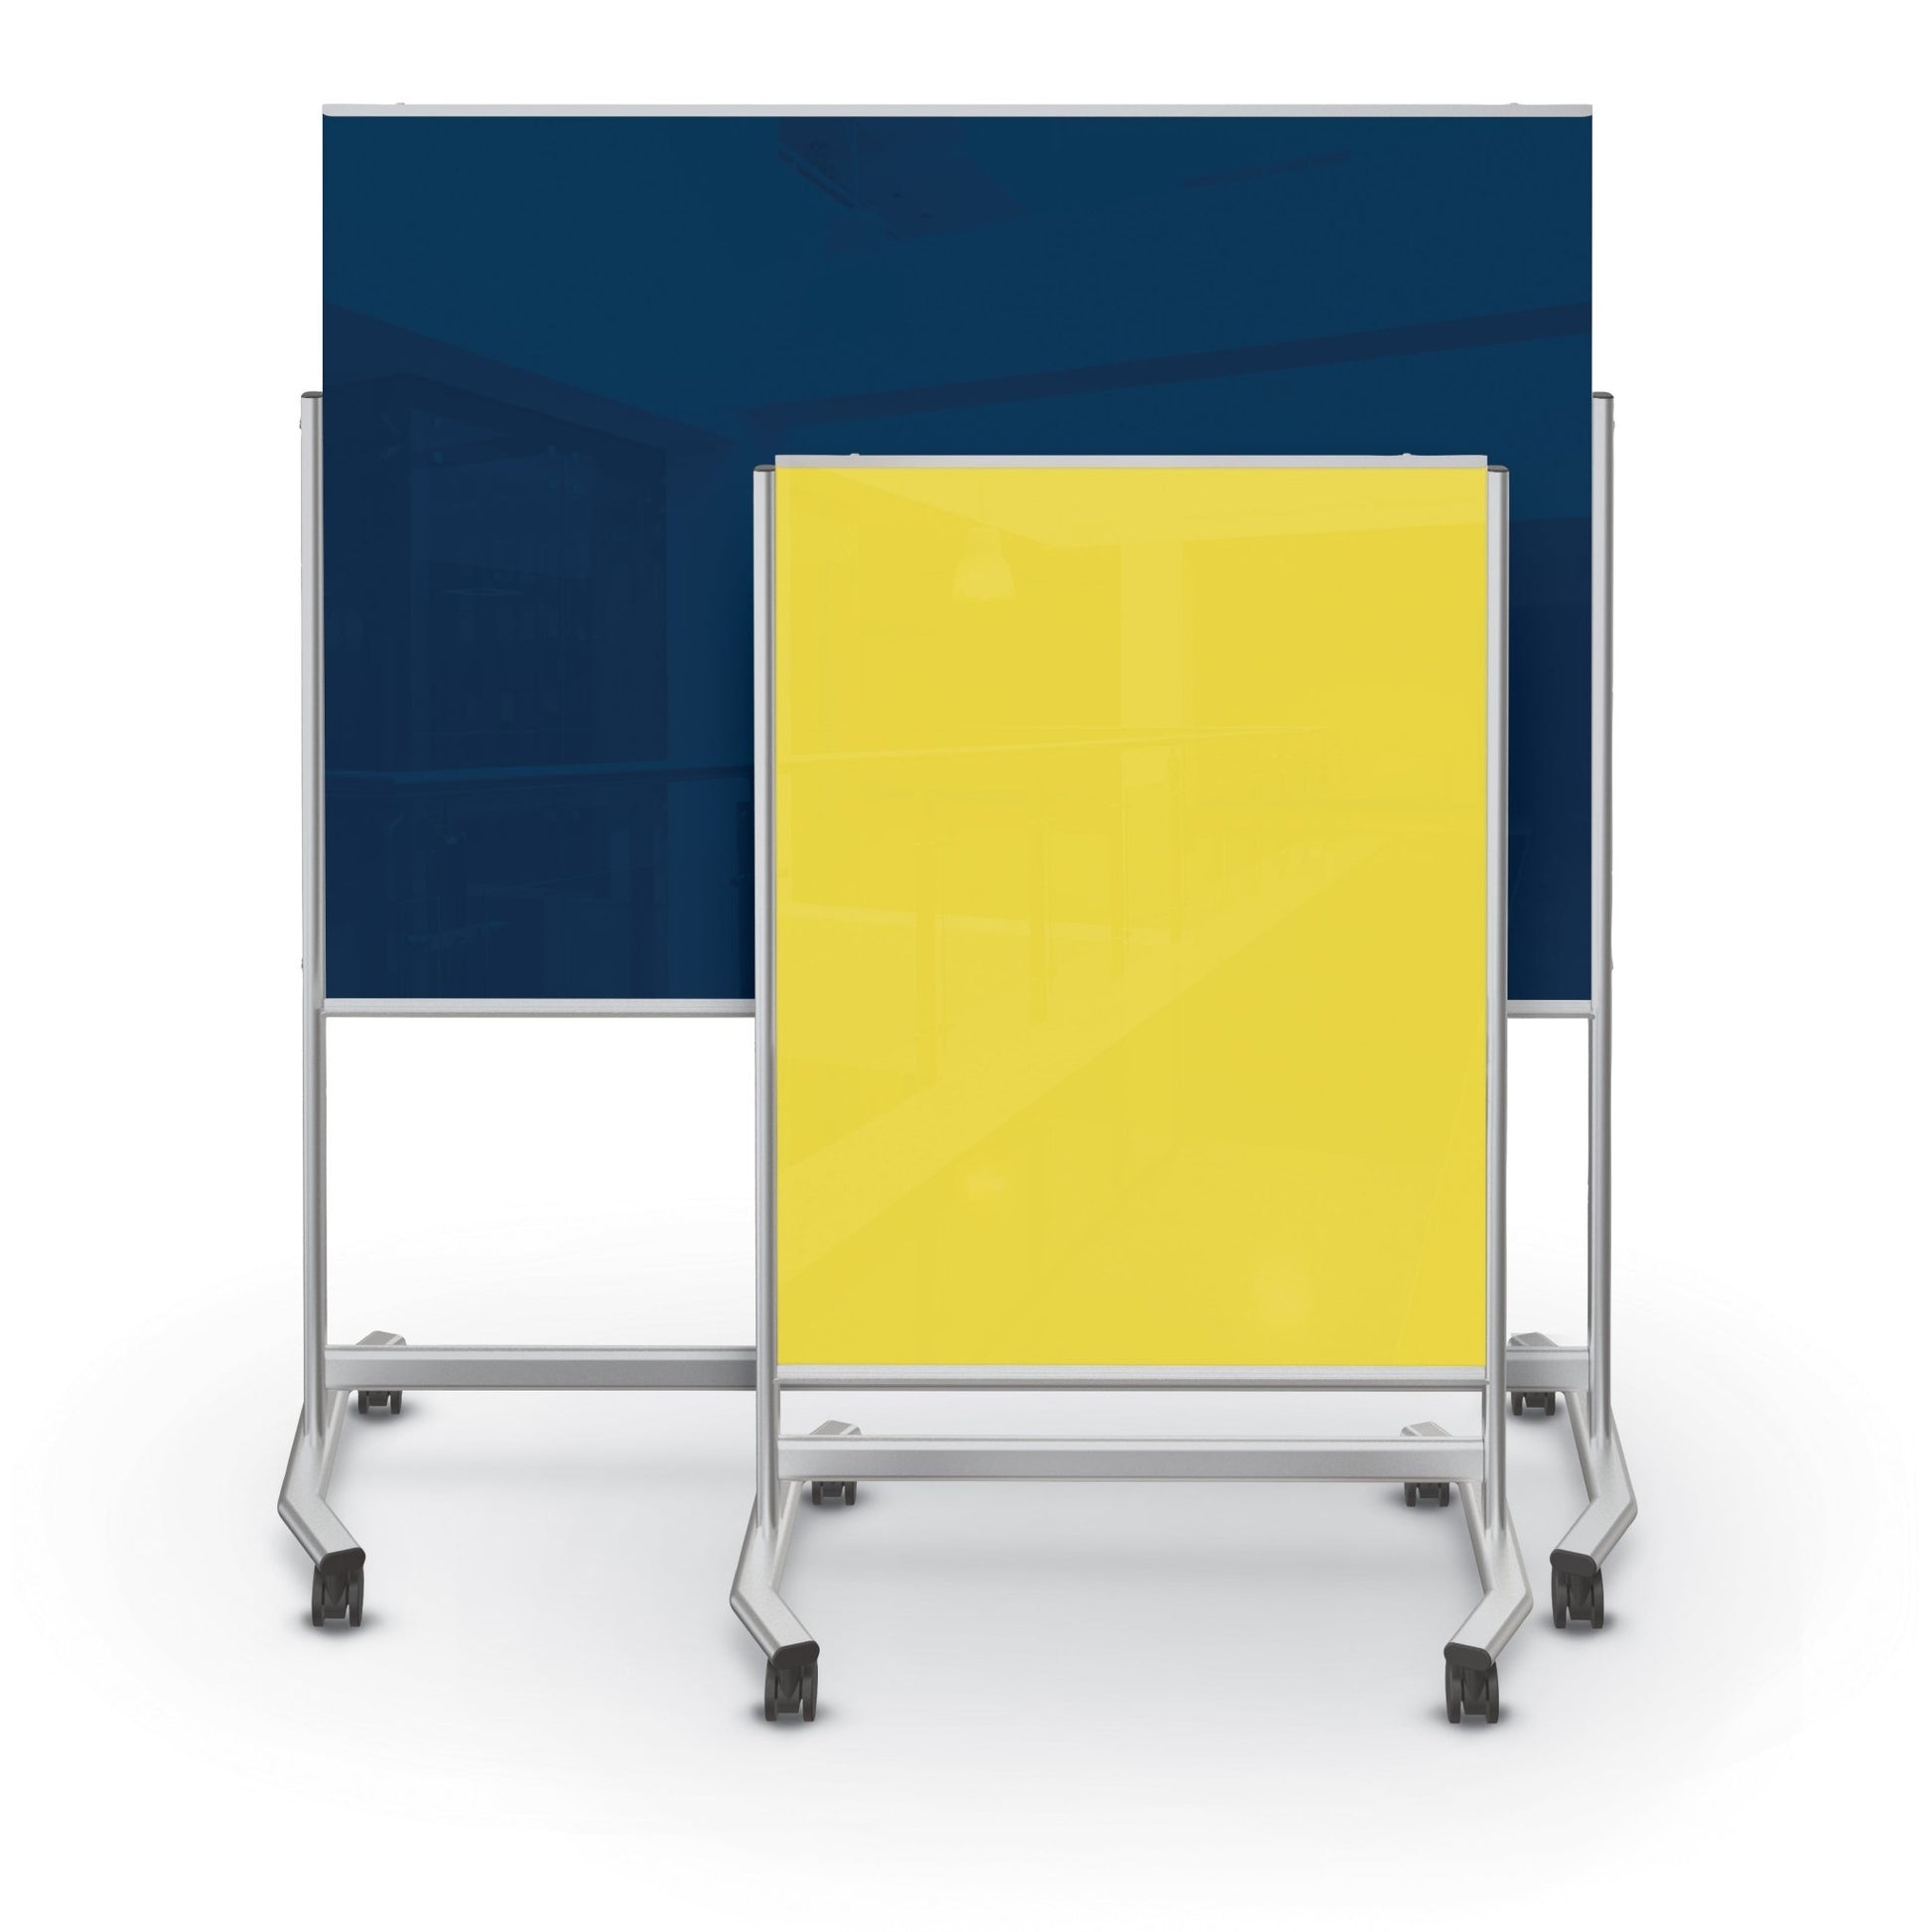 Mooreco Visionary Move Mobile Magnetic Glass board - 4'H x 6'W (Mooreco 74951) - SchoolOutlet